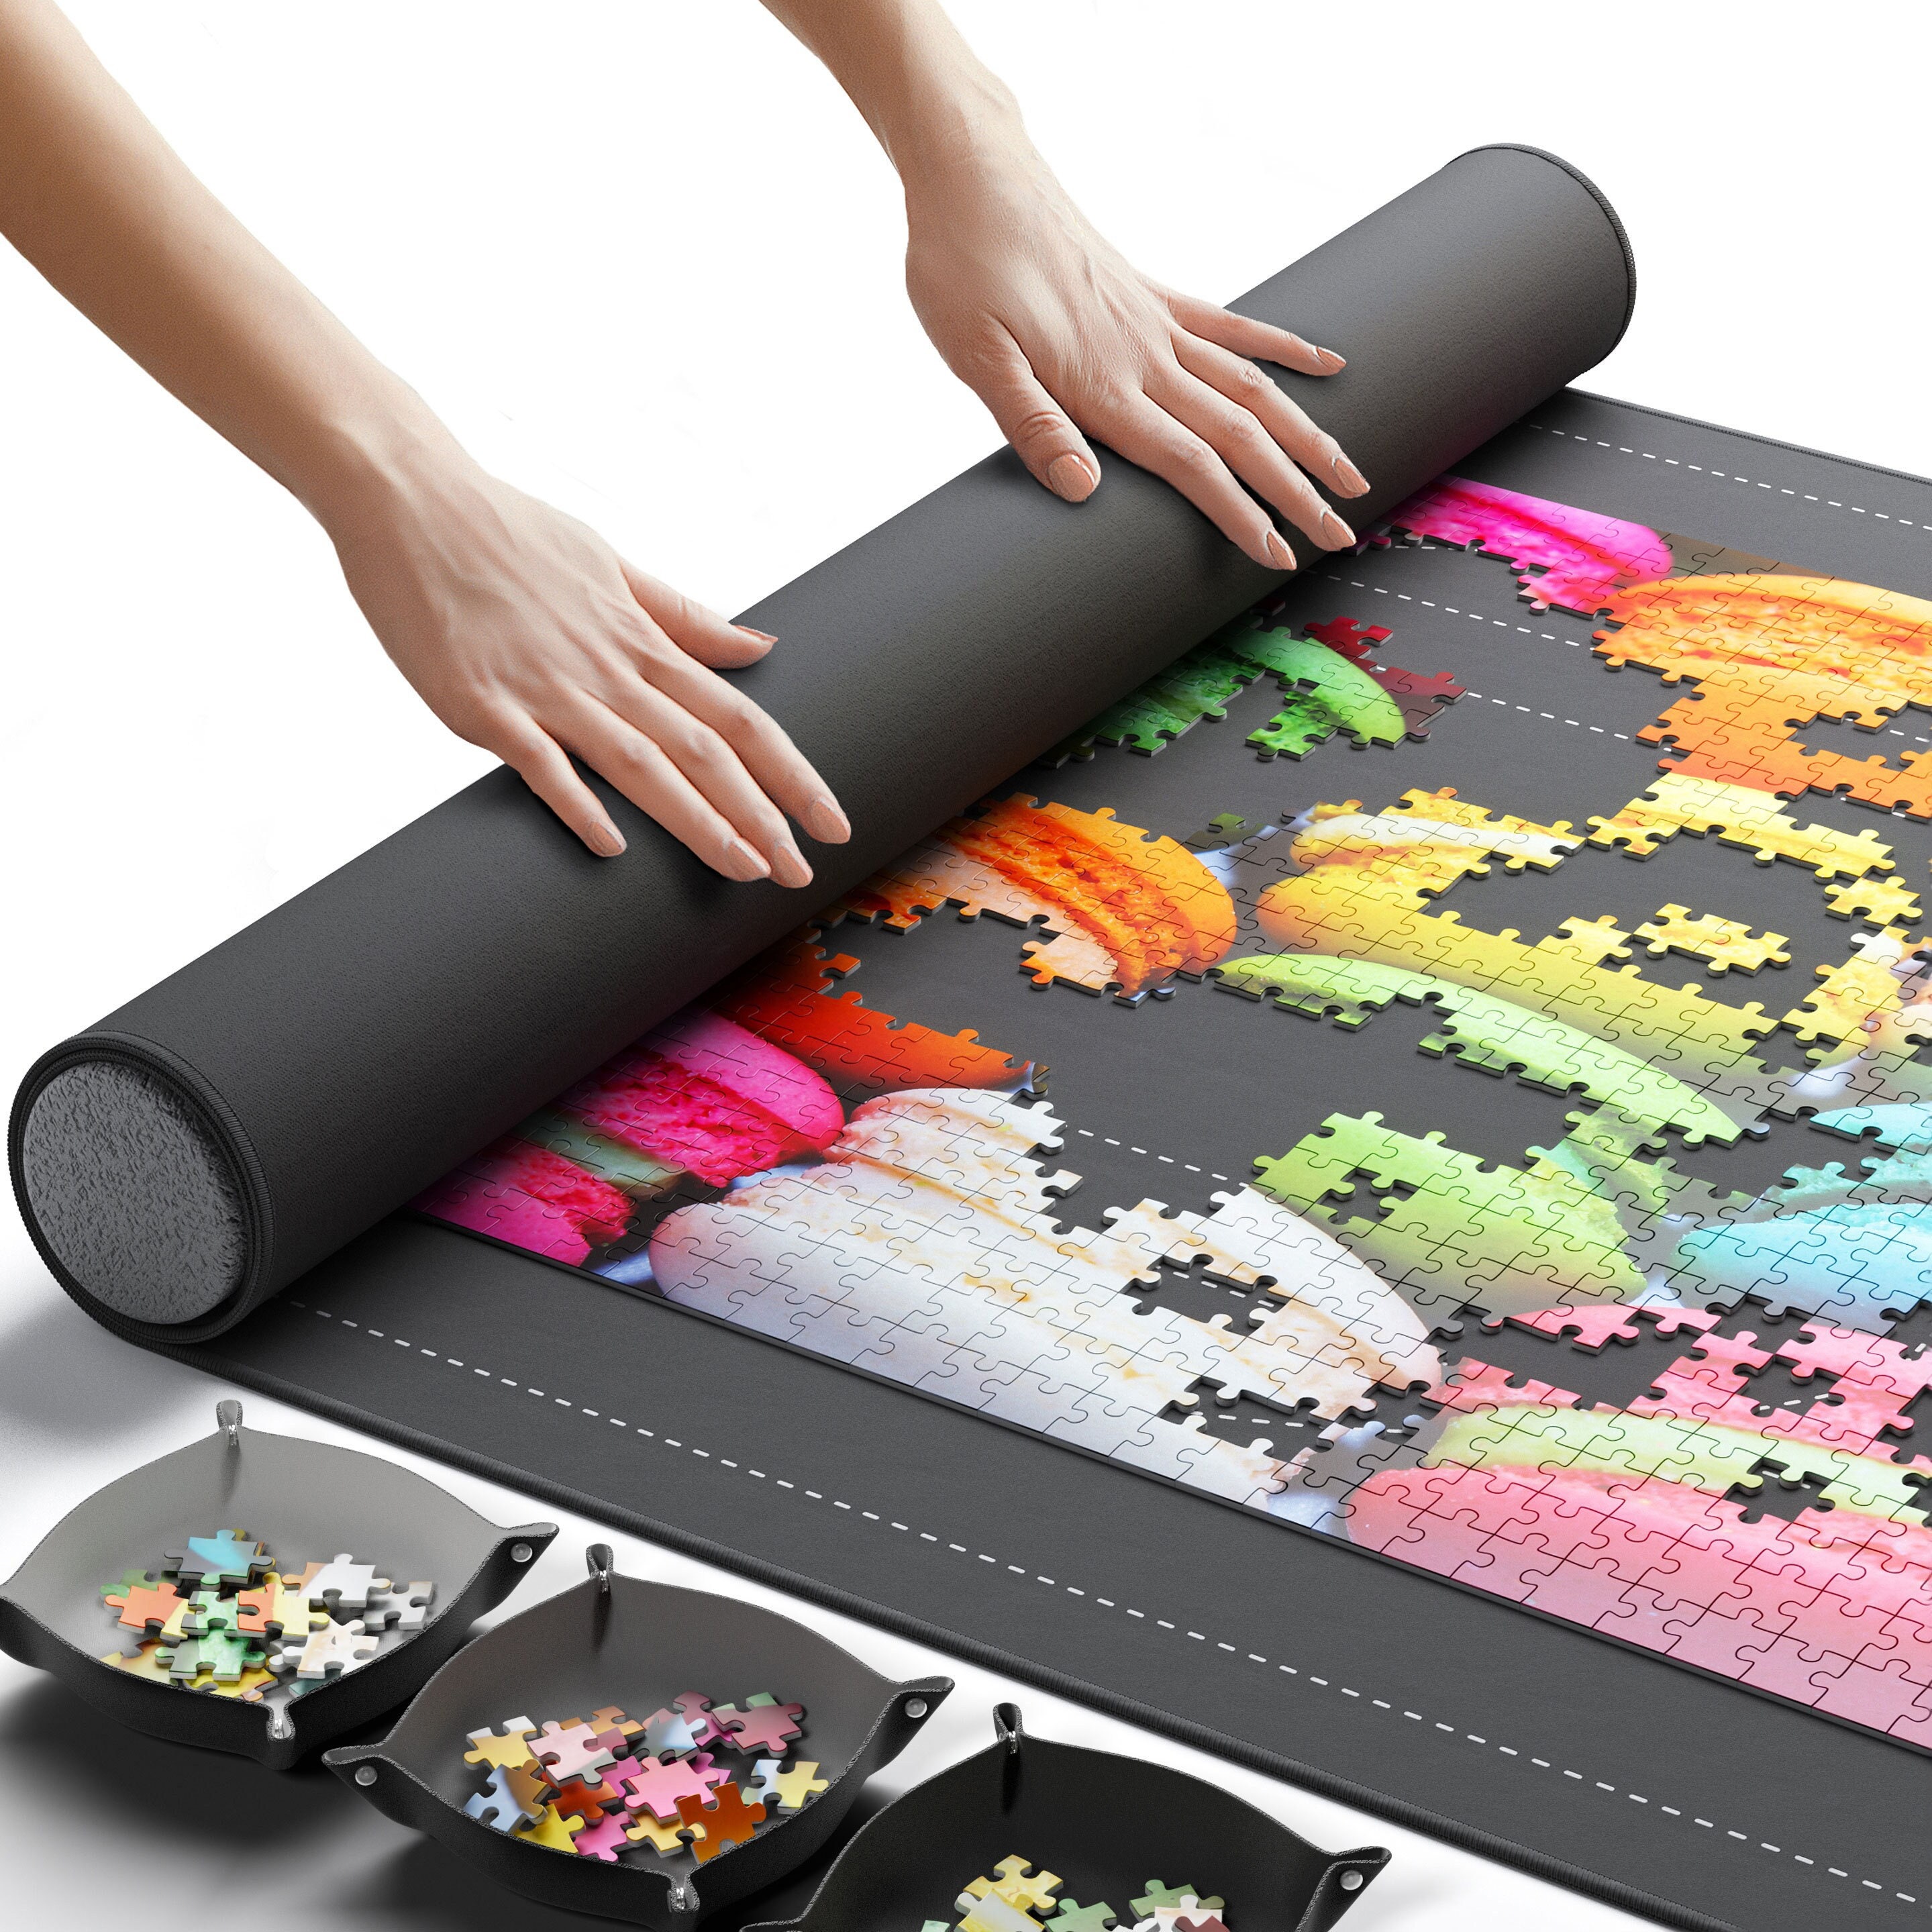 Lavievert Jigsaw Puzzle Board with 6 Sorting Trays, Lightweight Portable  Felt Puzzle Mat Puzzle Storage Puzzle Saver for Up to 1000 Pieces - Black